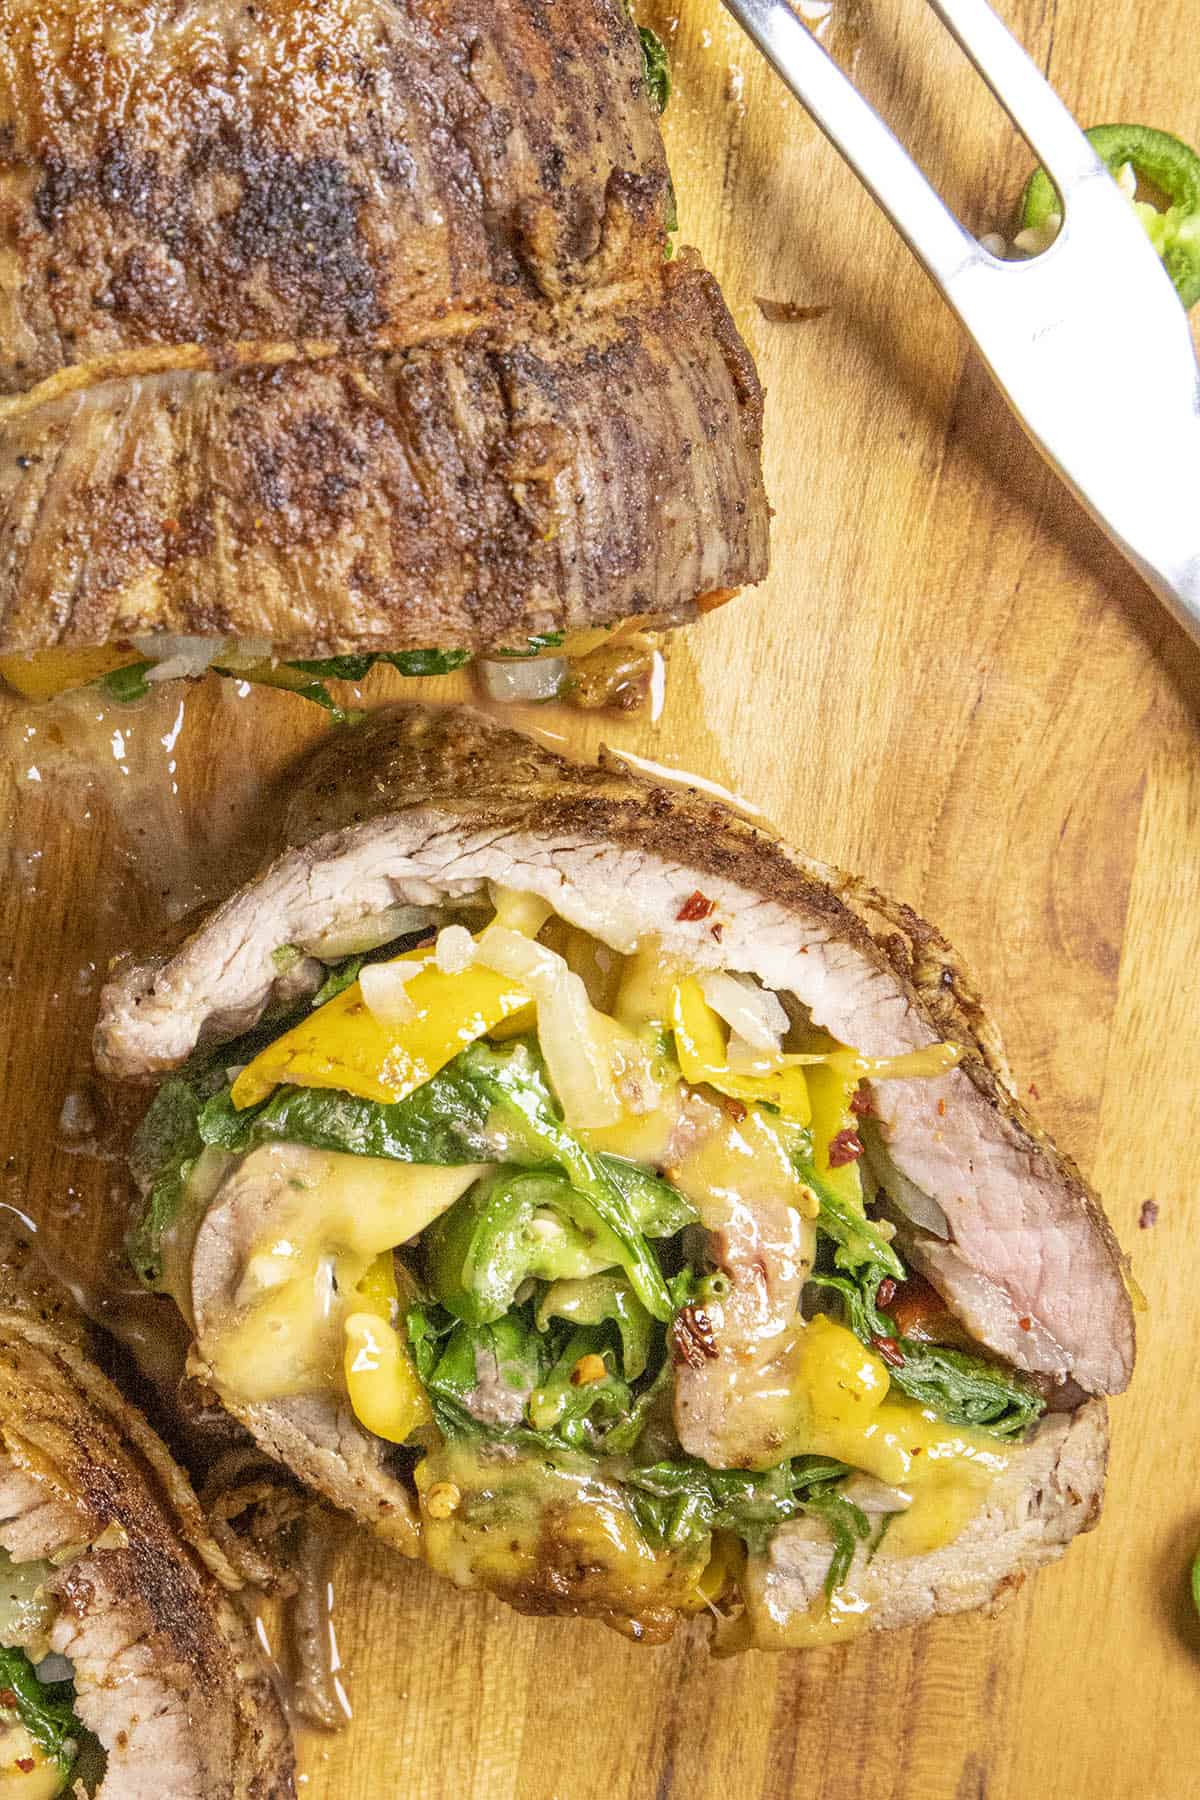 Spinach, Cheese and Chili Stuffed Flank Steak ready to serve